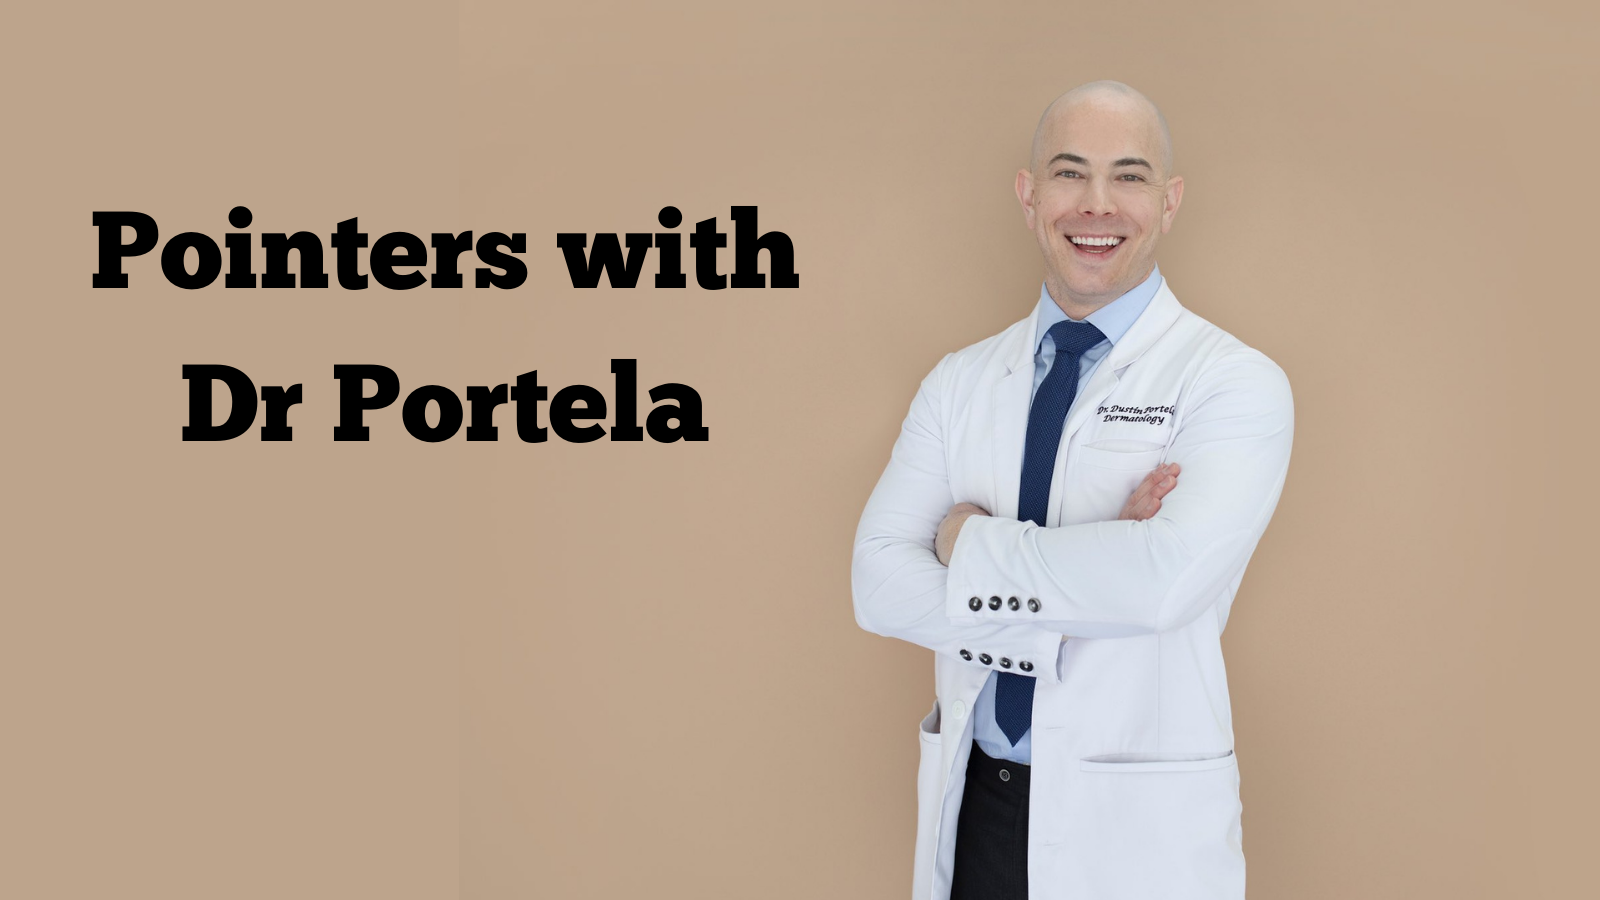 Pointers with Dr Portela: Between Two Derms Podcast